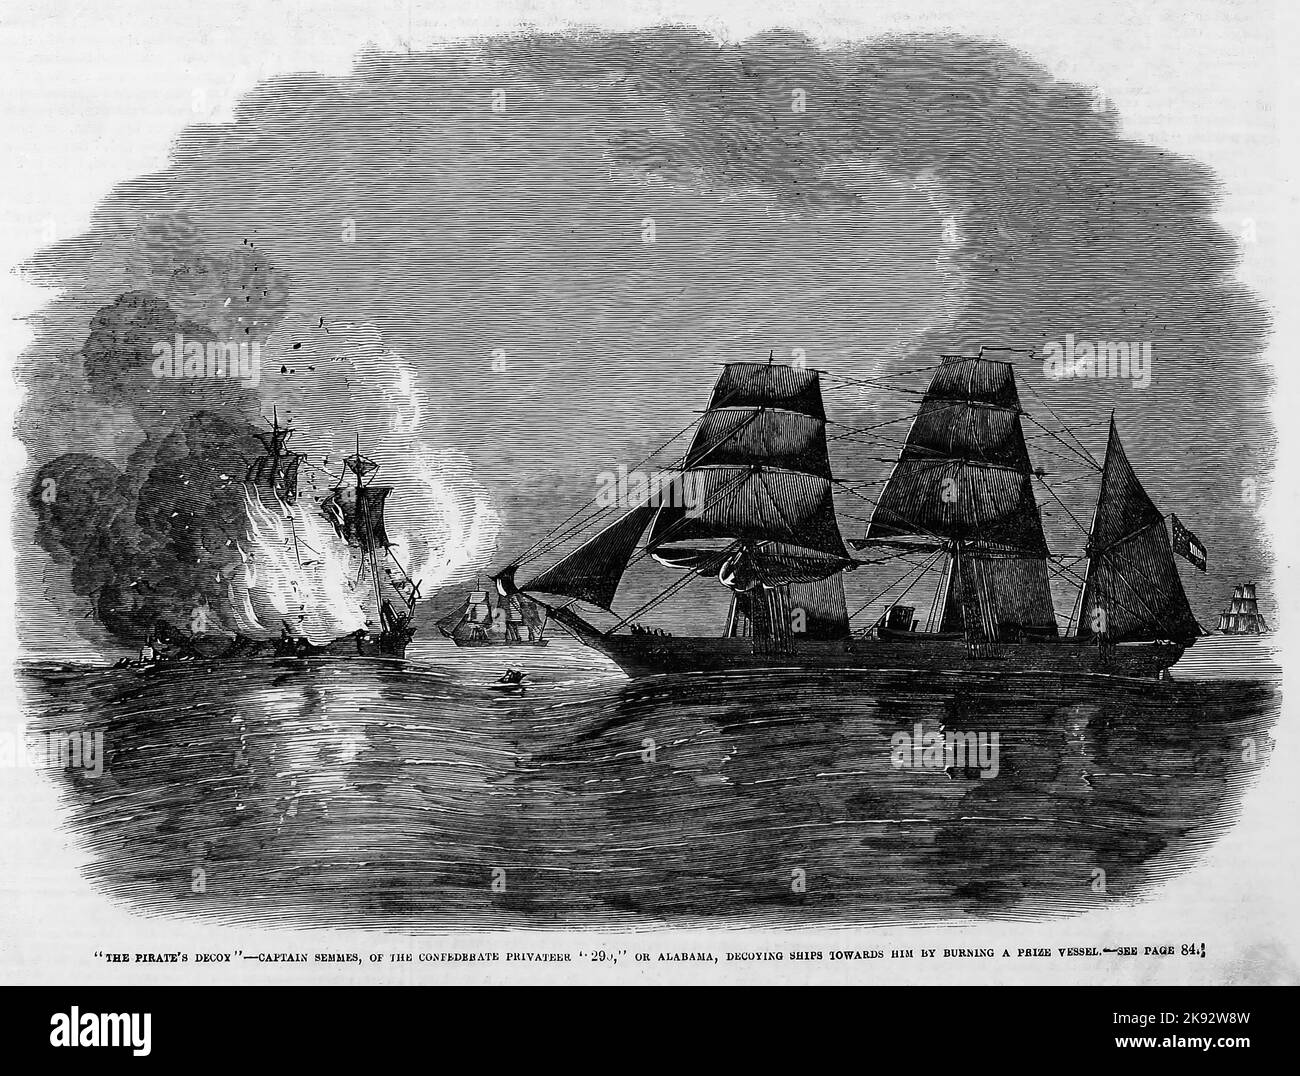 'The Pirate's Decoy' - Captain Raphael Semmes, of the Confederate privateer Alabama, decoying ships towards him by burning a prize vessel. October 1862. 19th century American Civil War illustration from Frank Leslie's Illustrated Newspaper Stock Photo